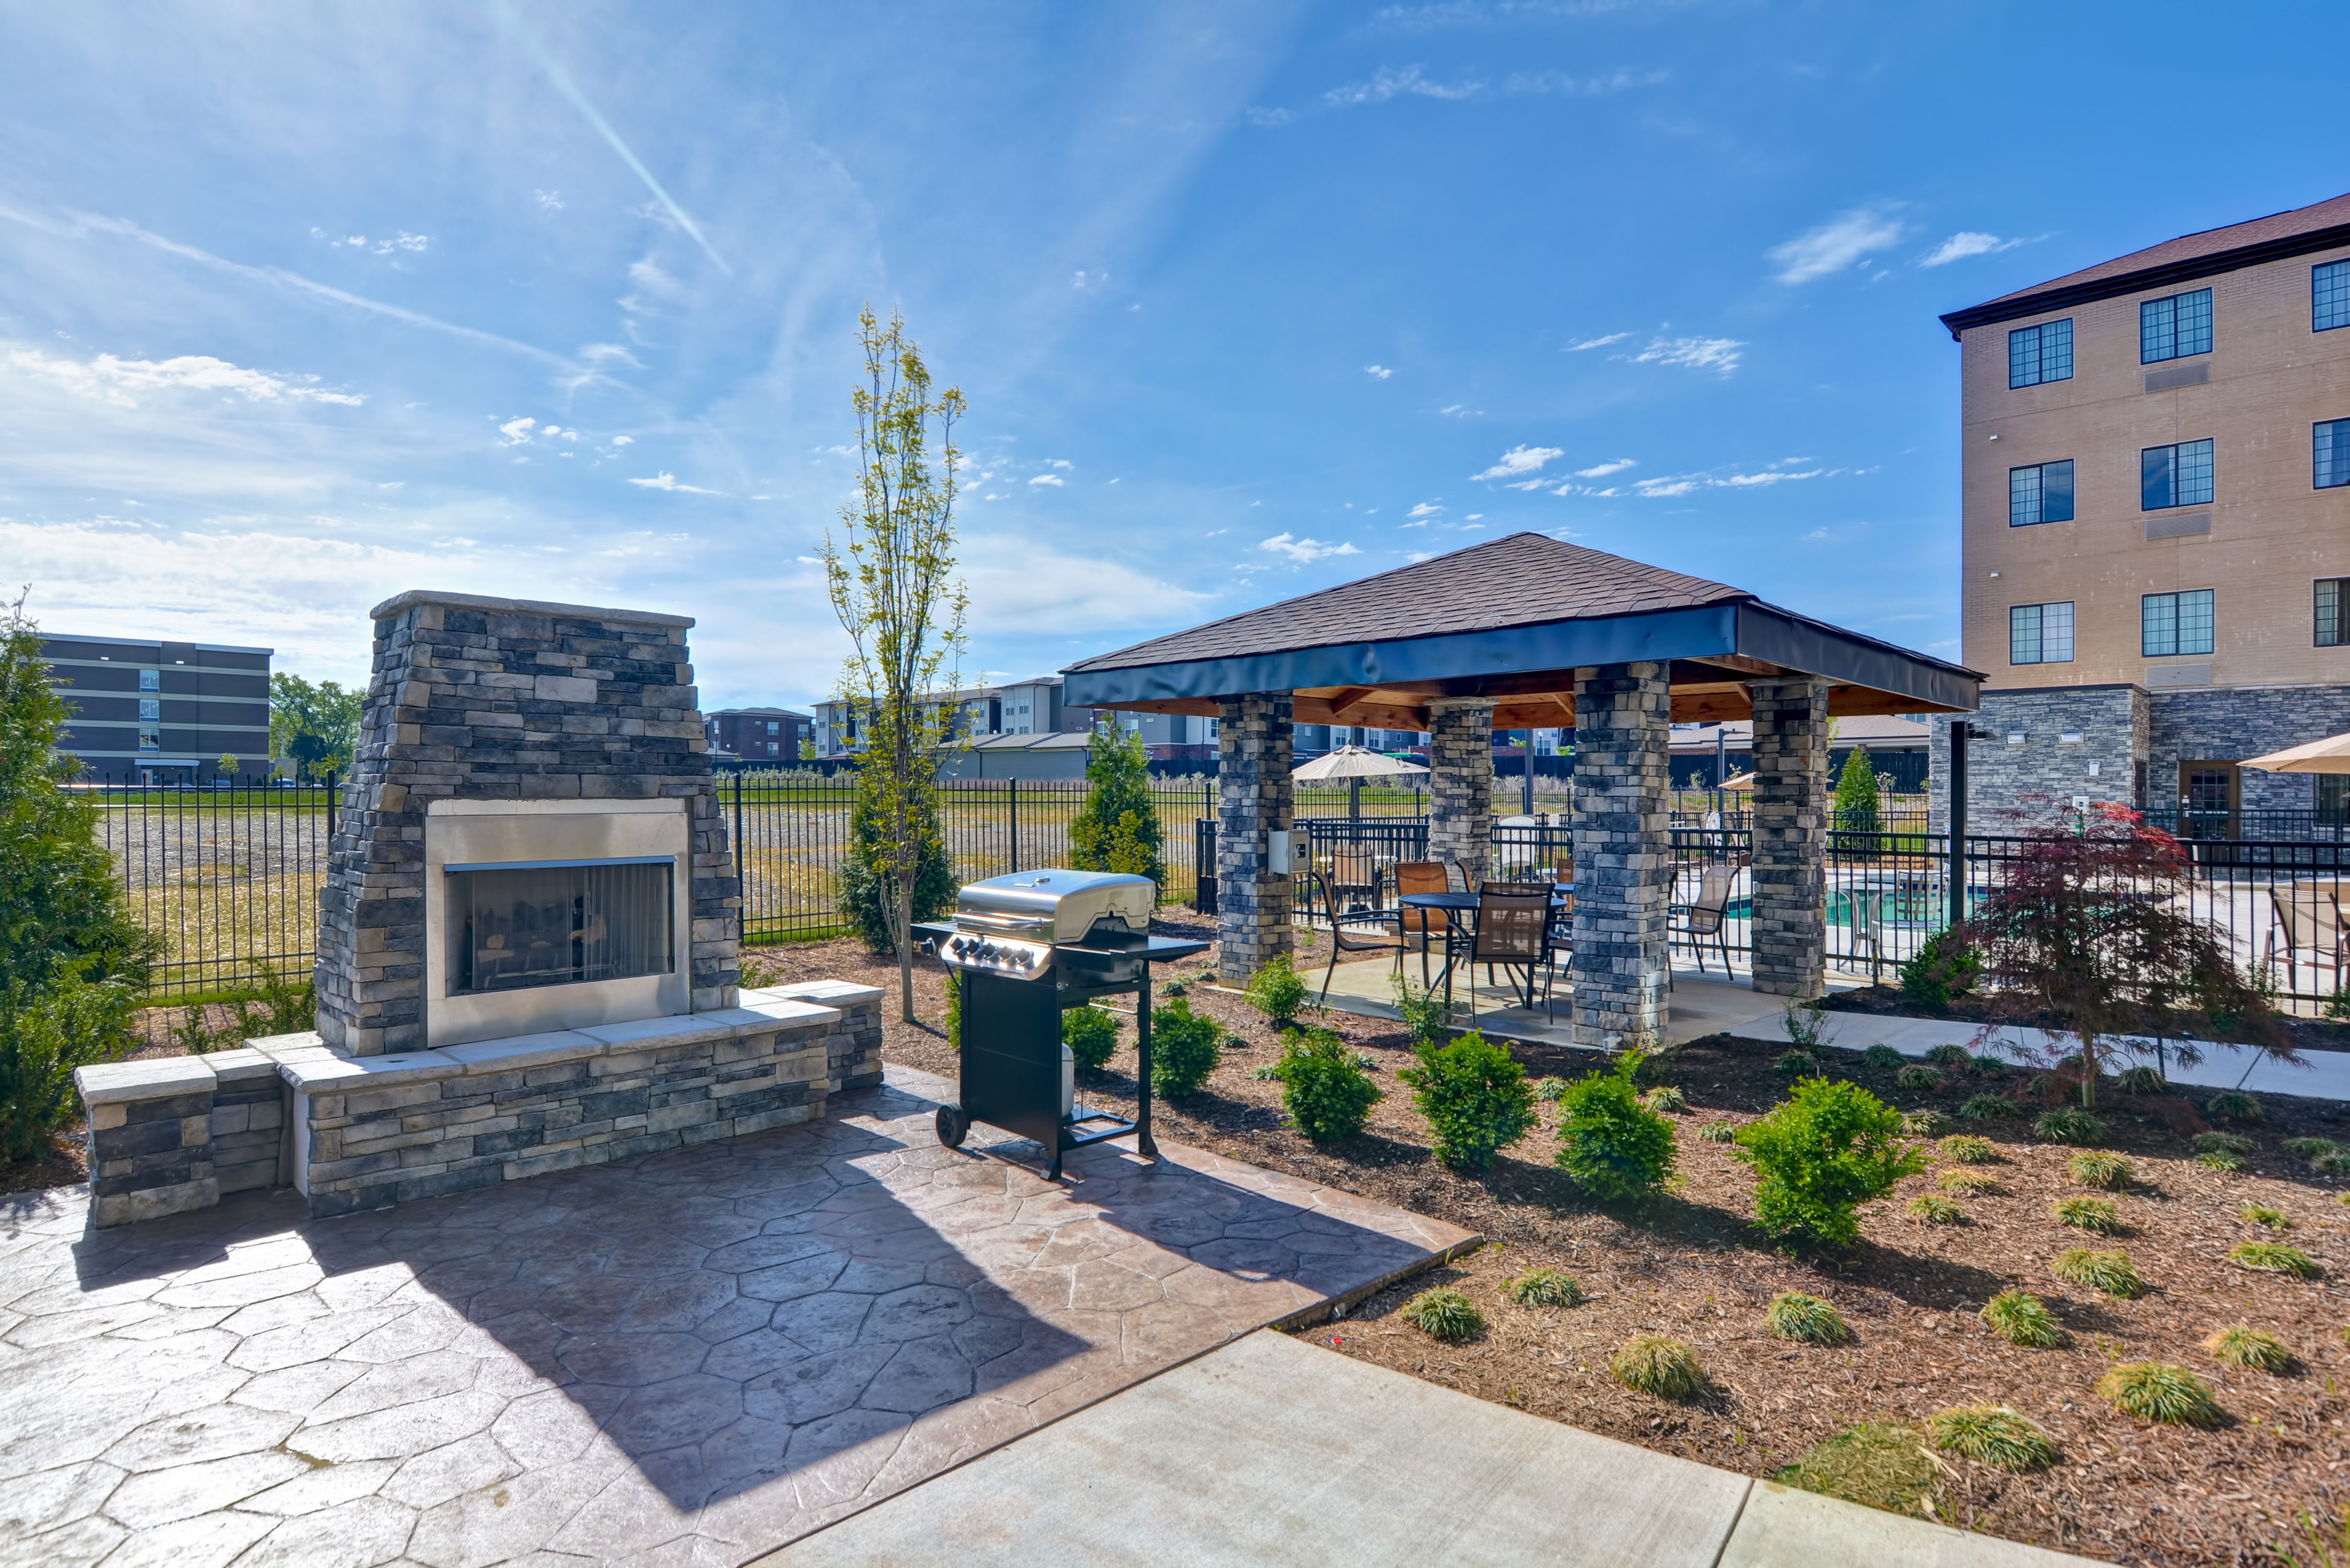 Enjoy the firepit & grills on the patio at our Nashville hotel.